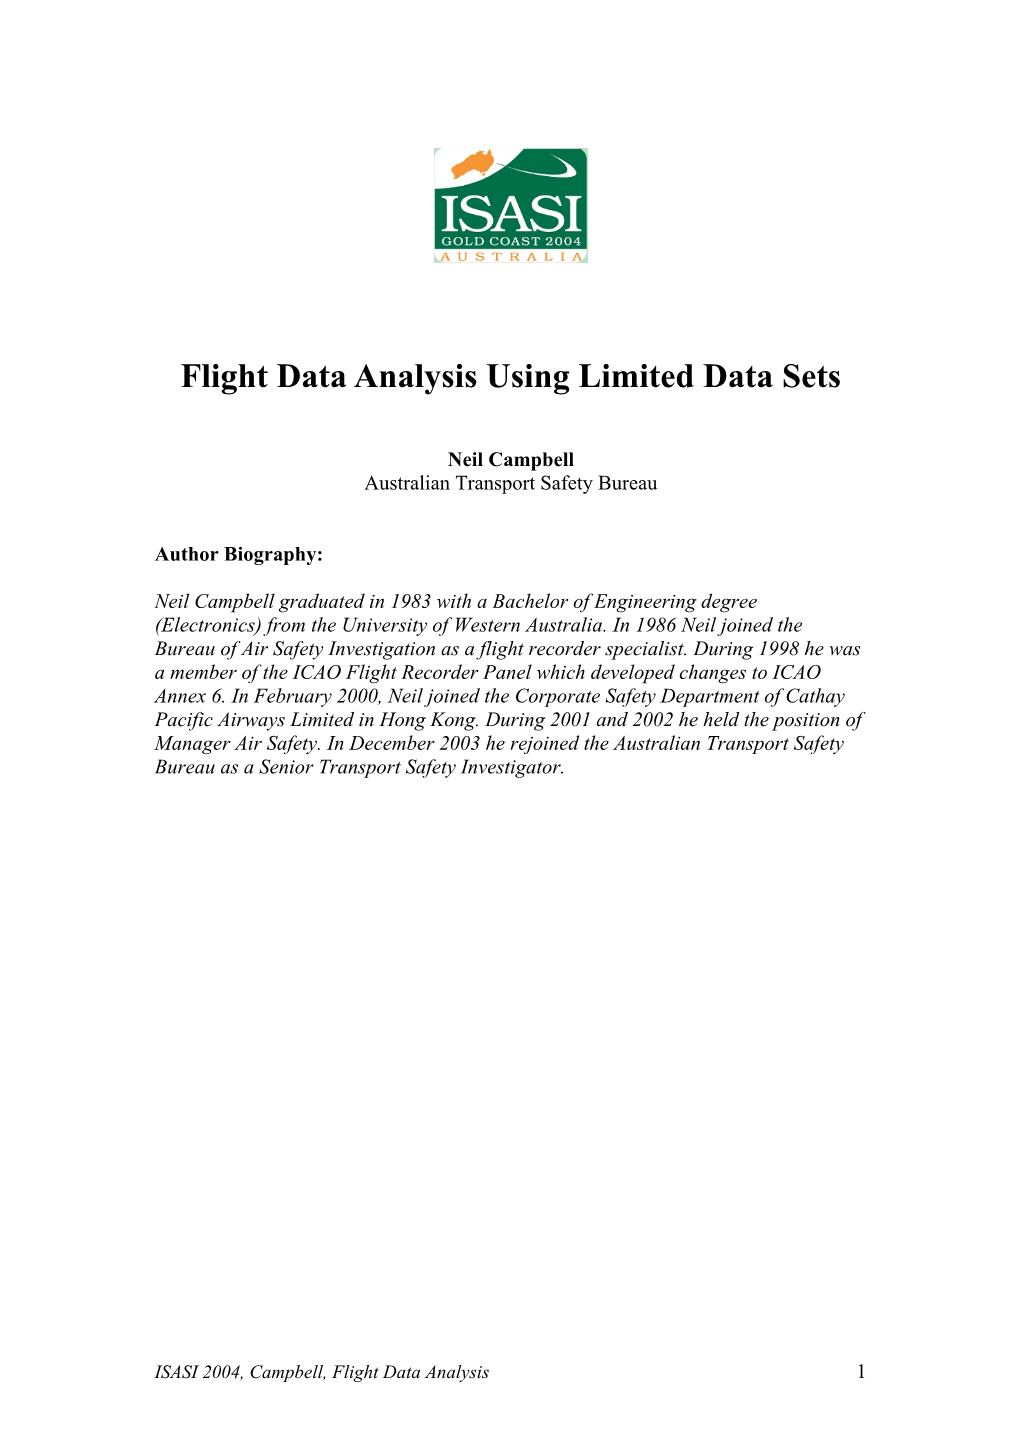 Flight Data Analysis Using Limited Data Sets Presented by Neil